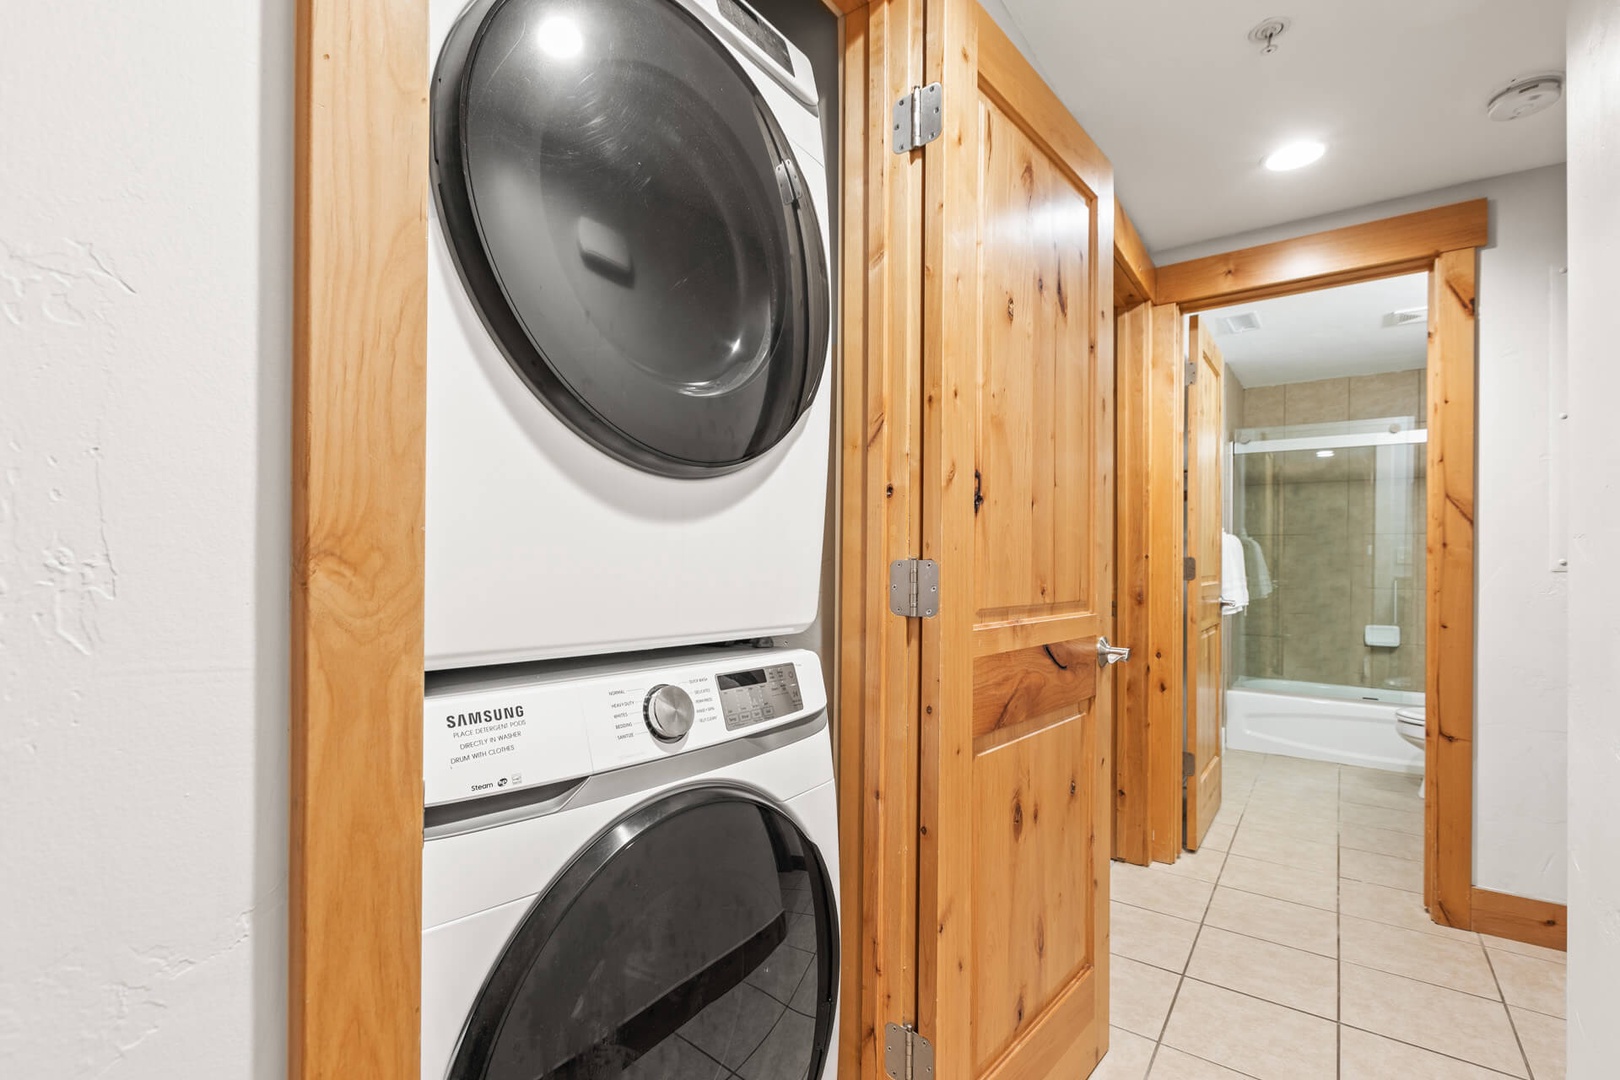 Bear Hollow Lodges 4203: This accommodating condominium also has a LAUNDRY closet with a stacked Samsung washer and dryer